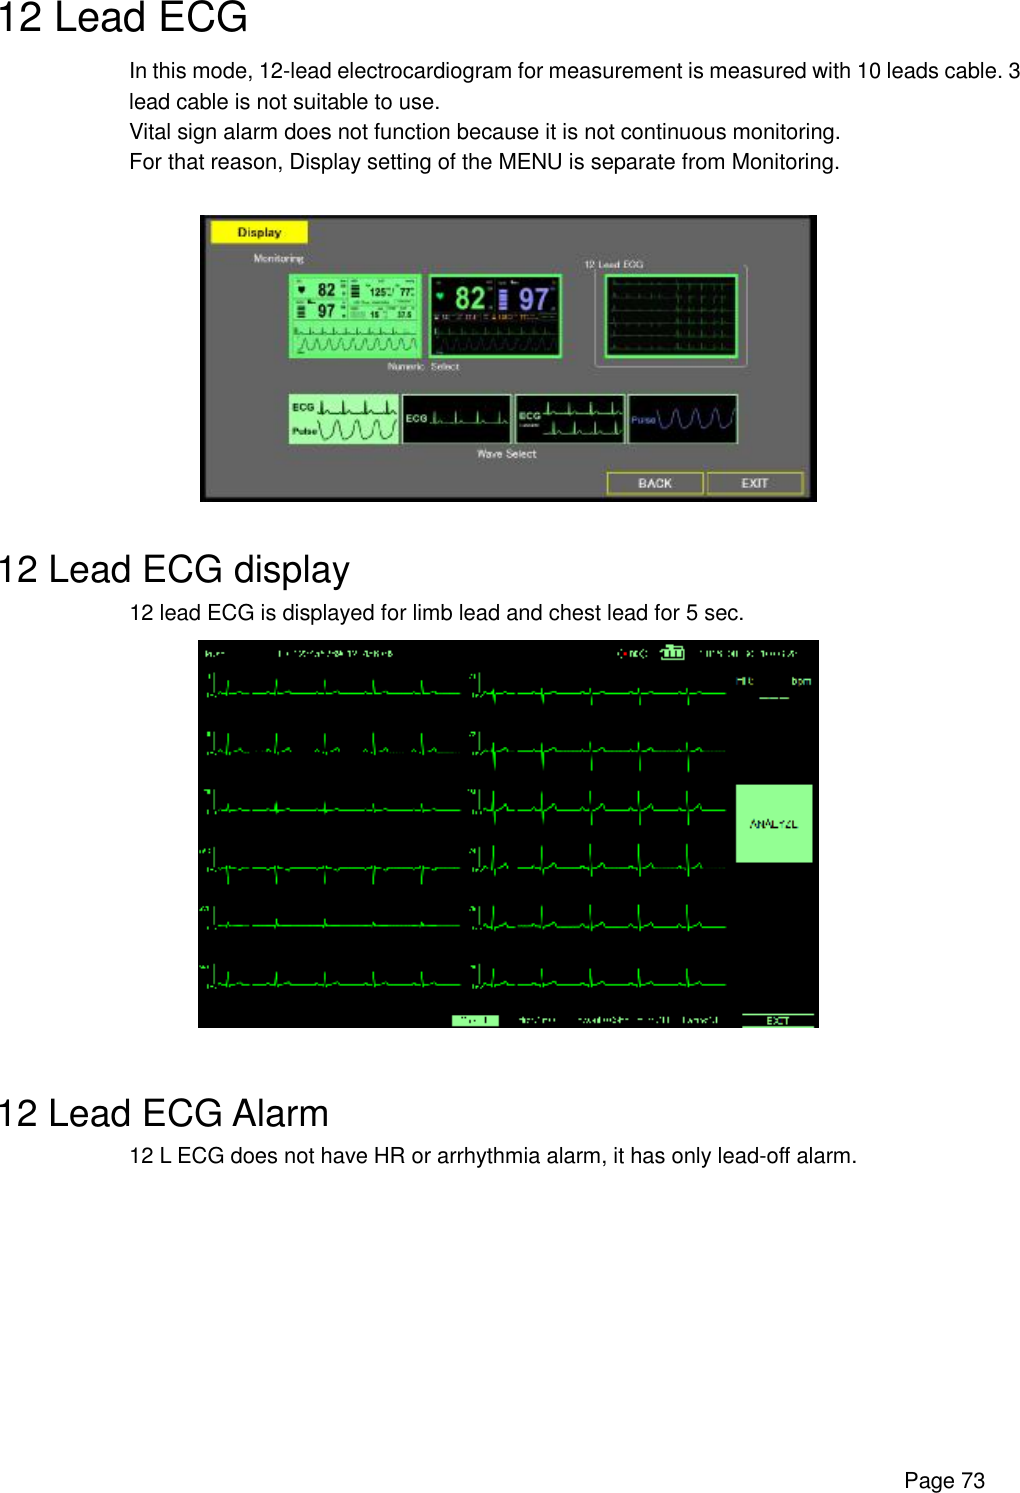      Page 73 12 Lead ECG In this mode, 12-lead electrocardiogram for measurement is measured with 10 leads cable. 3 lead cable is not suitable to use. Vital sign alarm does not function because it is not continuous monitoring. For that reason, Display setting of the MENU is separate from Monitoring.    12 Lead ECG display 12 lead ECG is displayed for limb lead and chest lead for 5 sec.   12 Lead ECG Alarm 12 L ECG does not have HR or arrhythmia alarm, it has only lead-off alarm. 